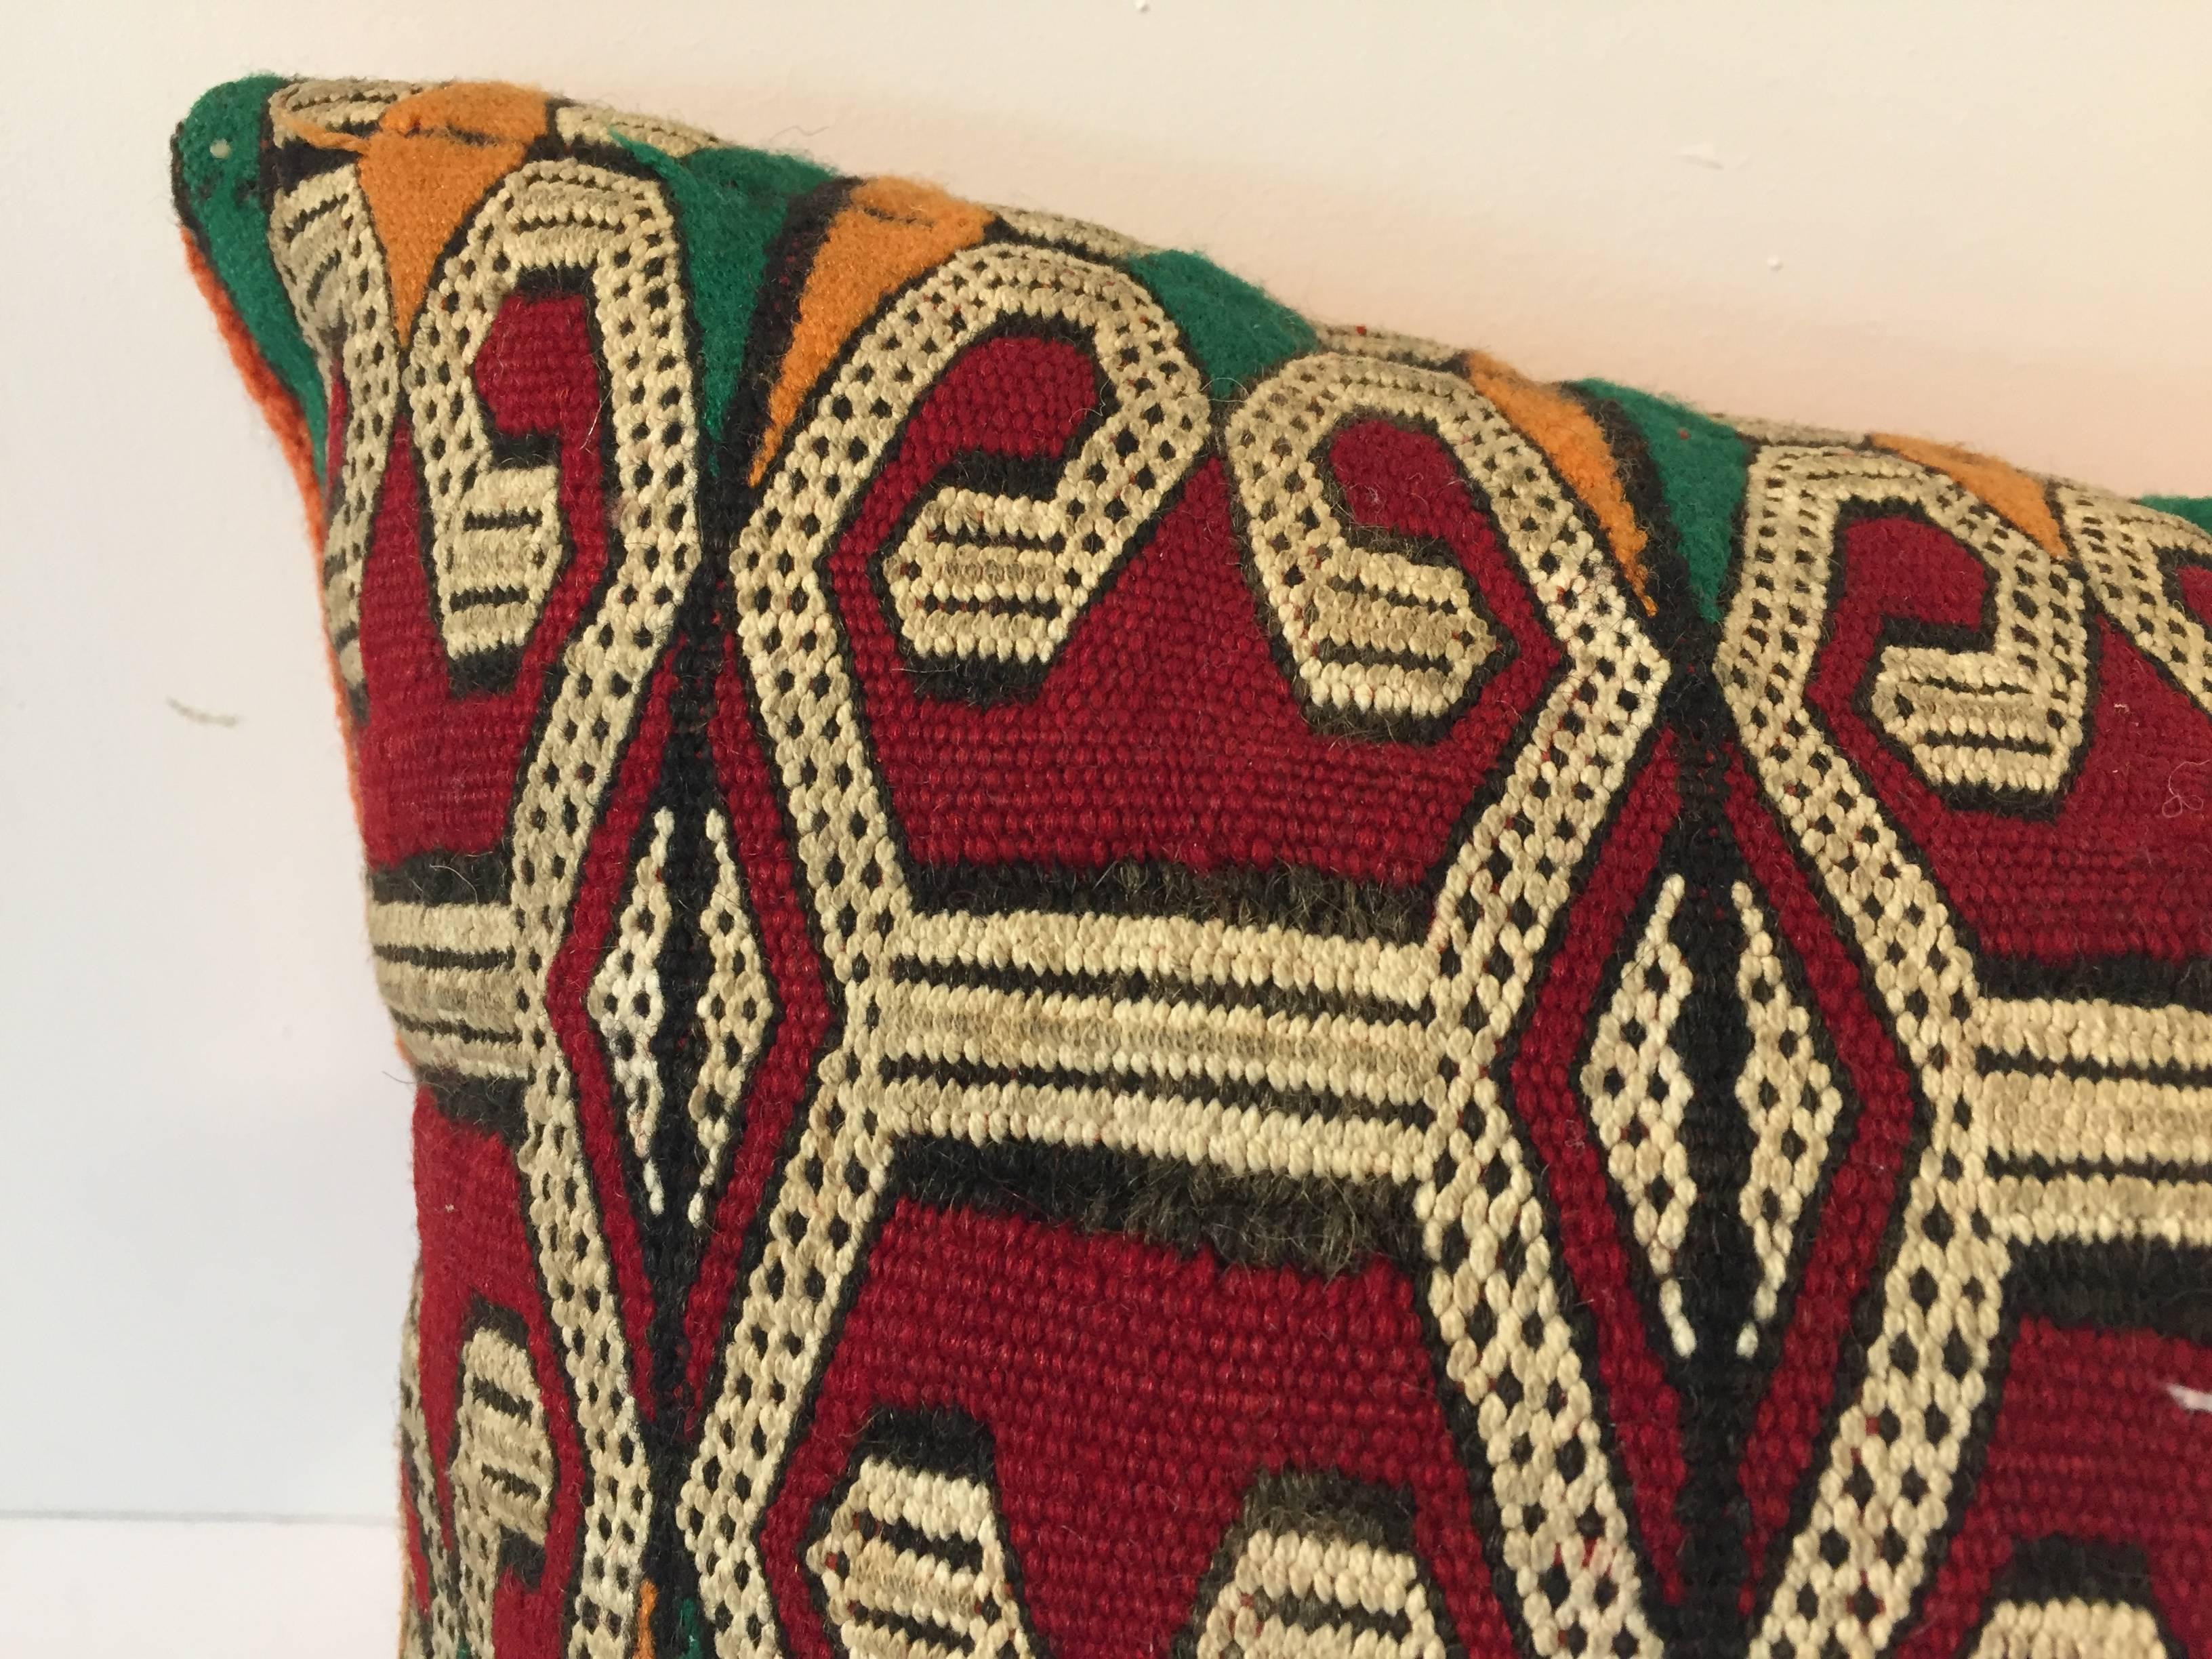 20th Century Moroccan Handwoven Pillow with Tribal African Designs